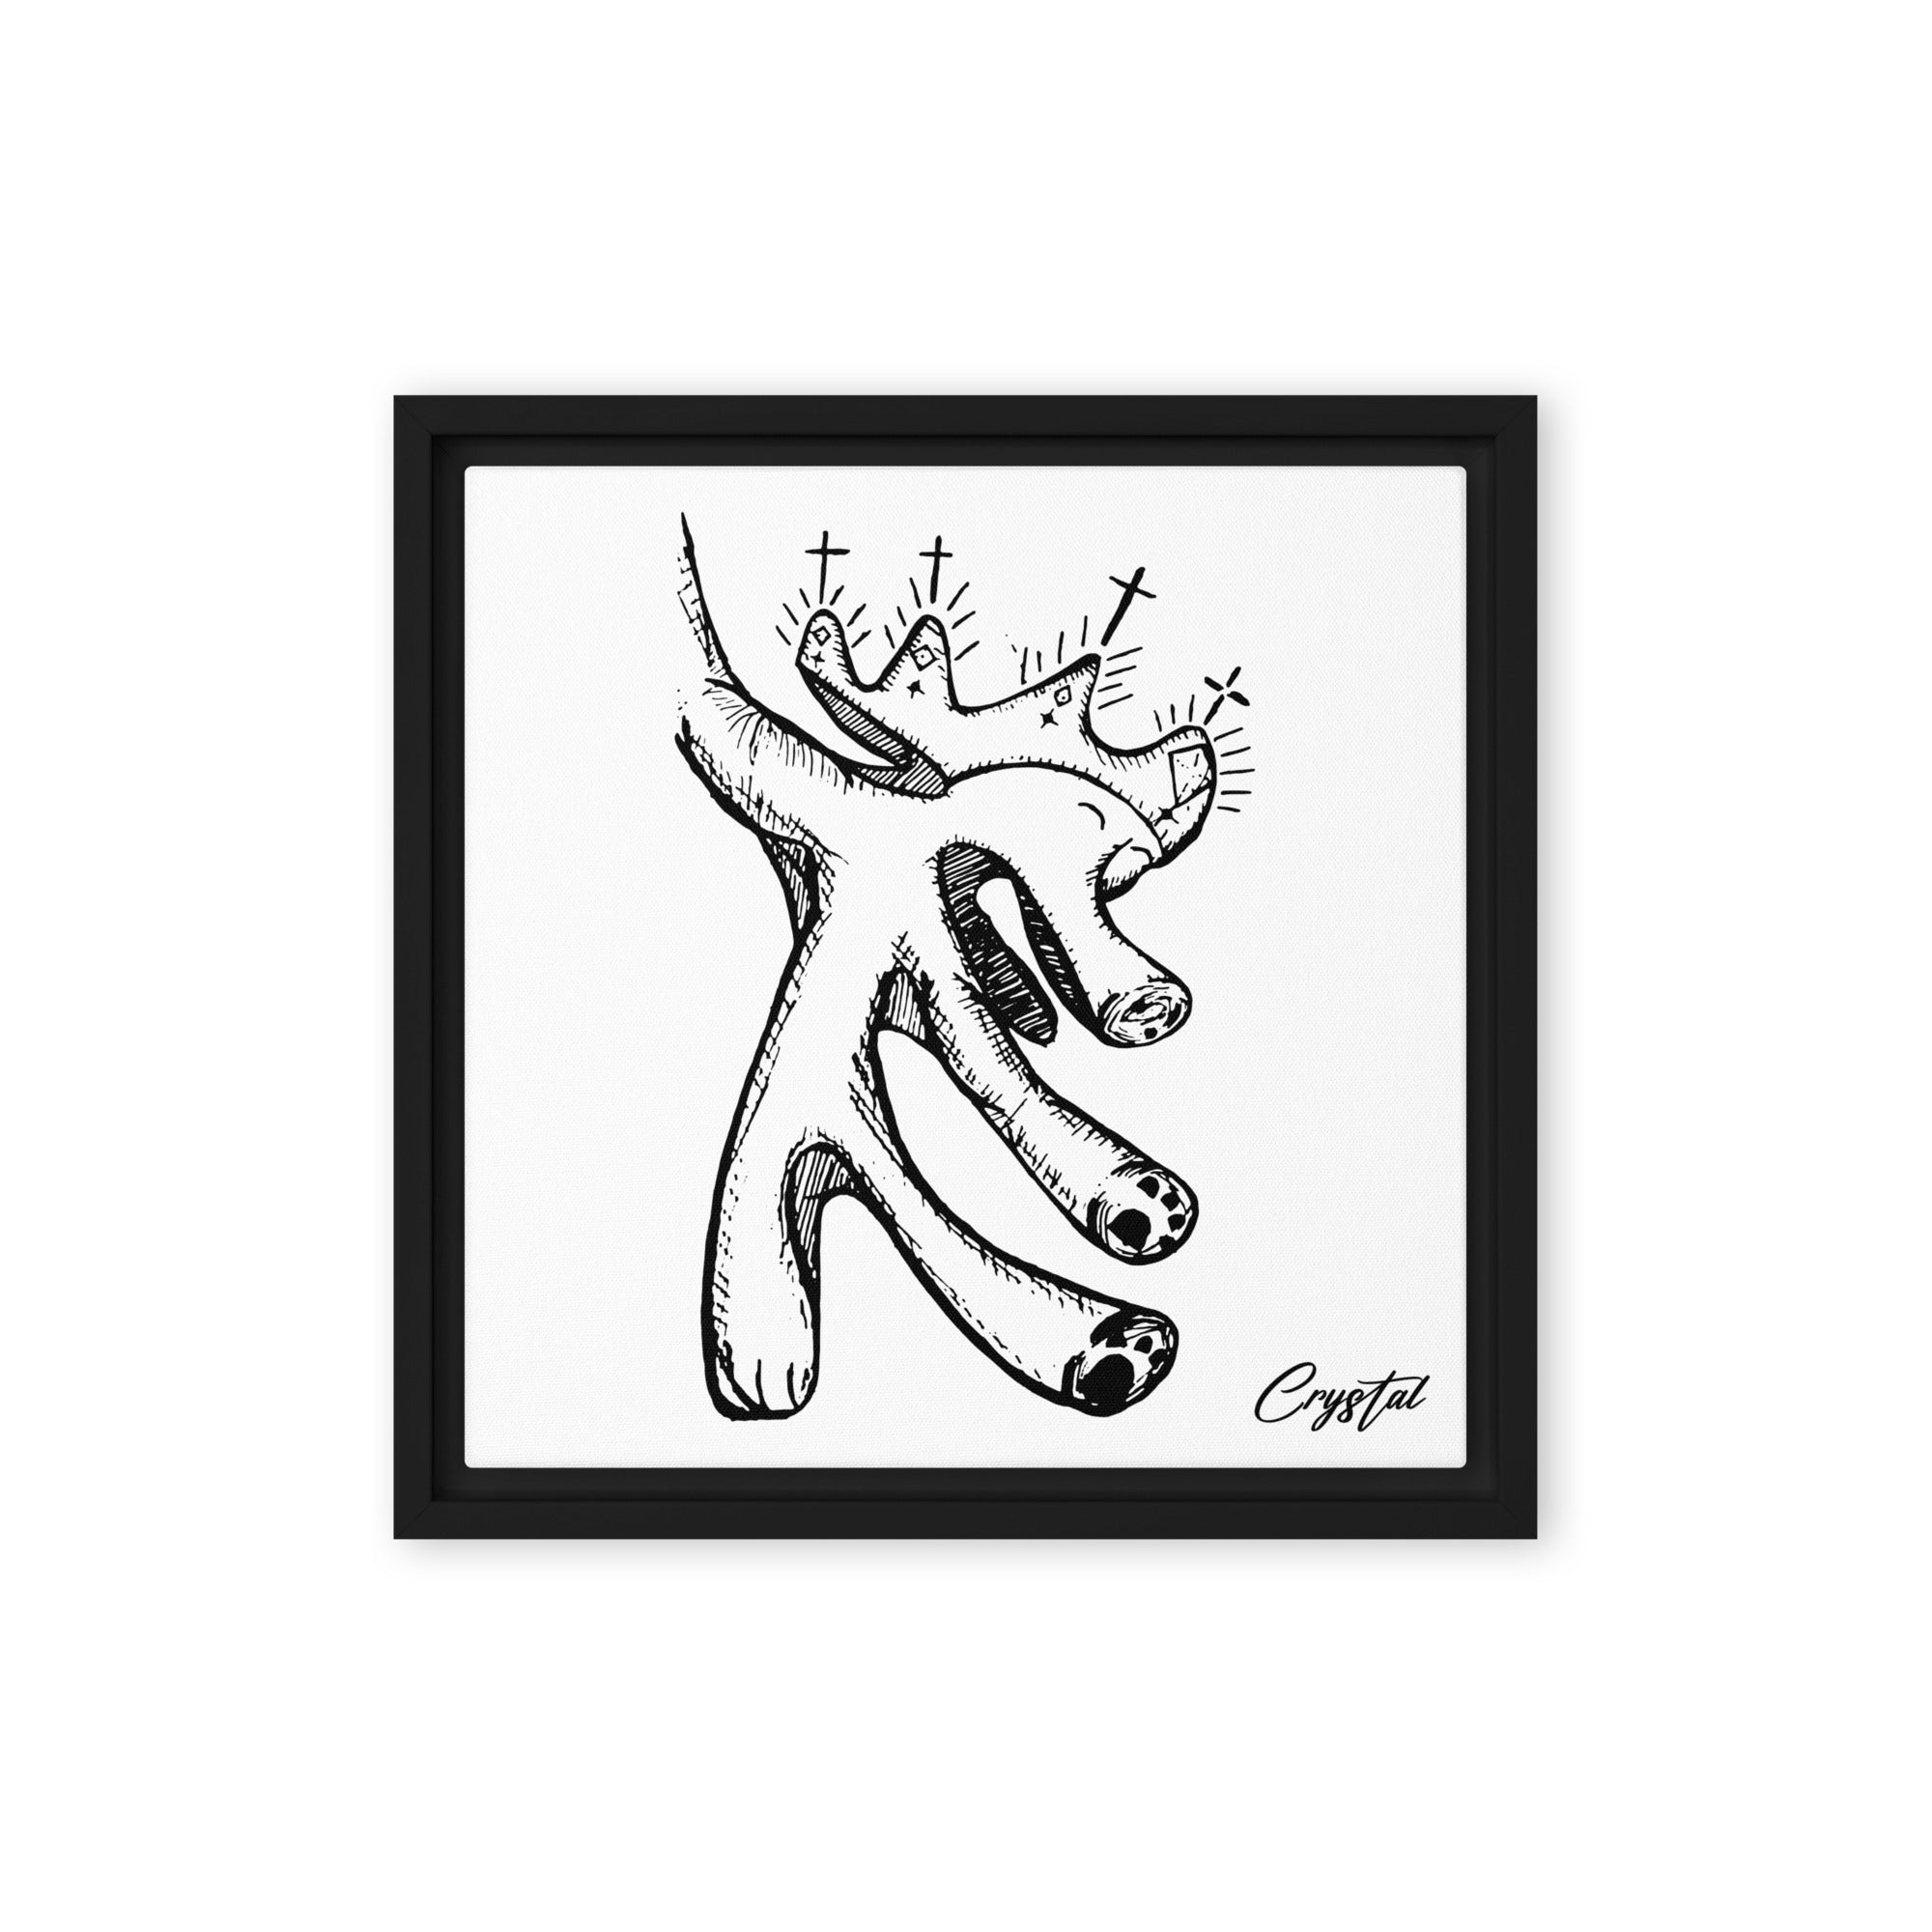 Drawing of Abstract Happy "Pig" Dinosaur Dancing with Crown - Cute & Creepy "Stay Weird" Cartoon Illustration Framed canvas